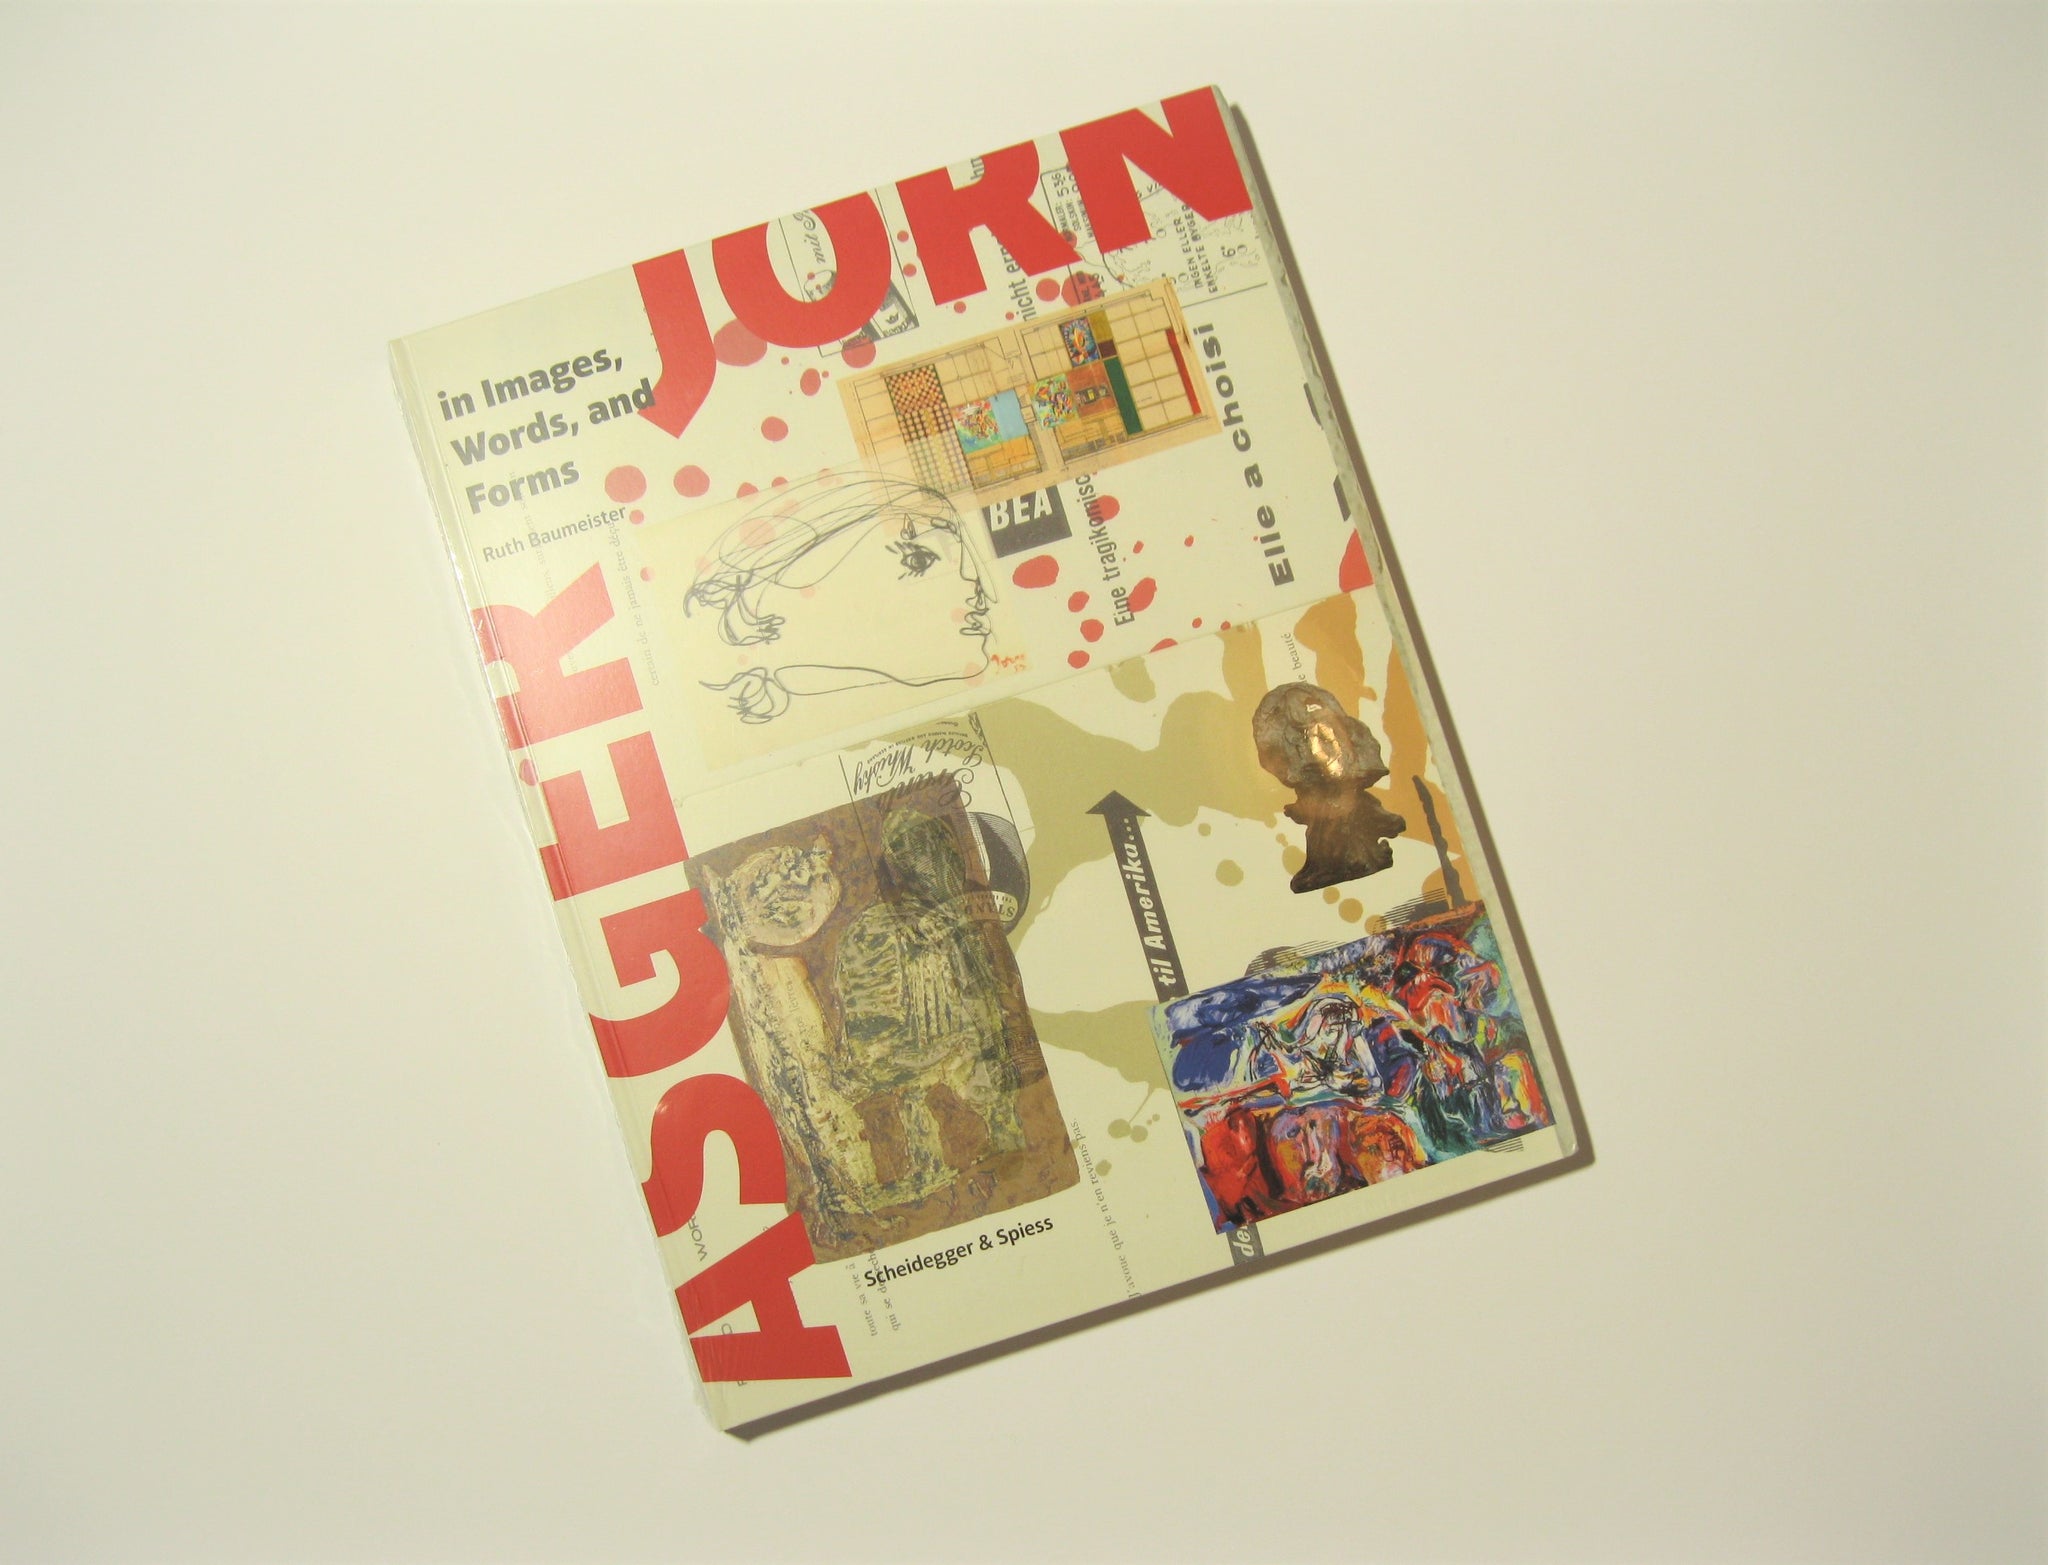 Asger Jorn in images, words, and form (UK)